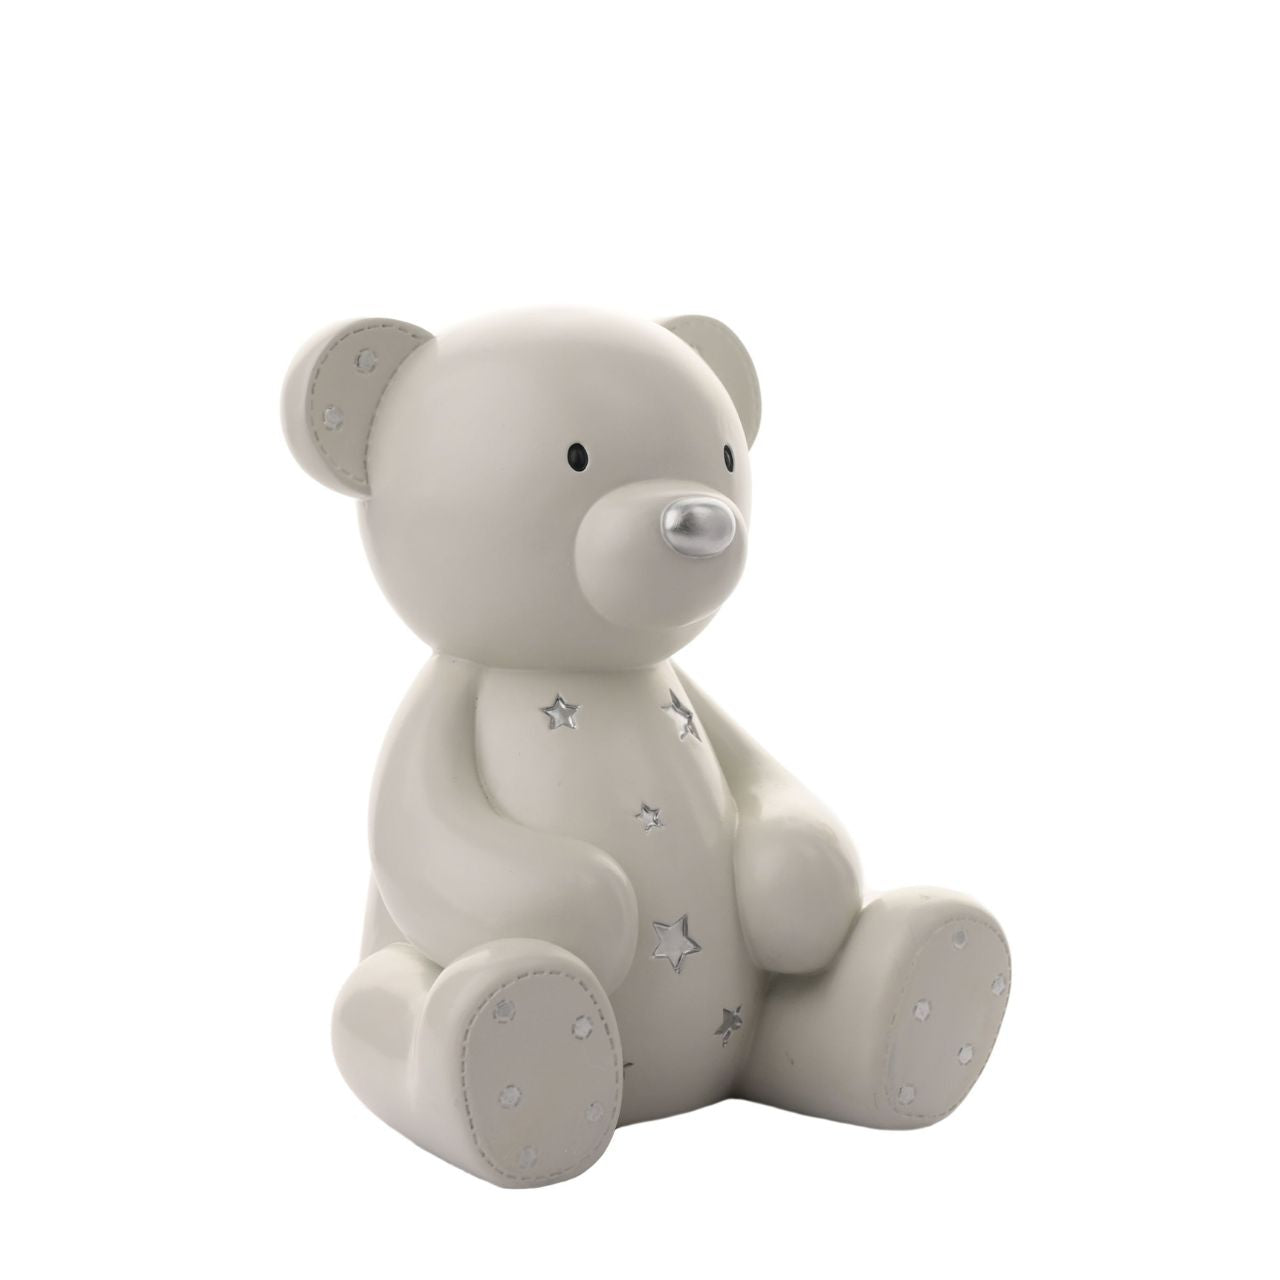 Bambino Large Teddy Resin Money Box 20 cm  A teddy bear shaped resin money box from BAMBINO BY JULIANA.  This wonderful keepsake provides glistening decoration for the nursery of new family arrivals which will be cherished eternally.